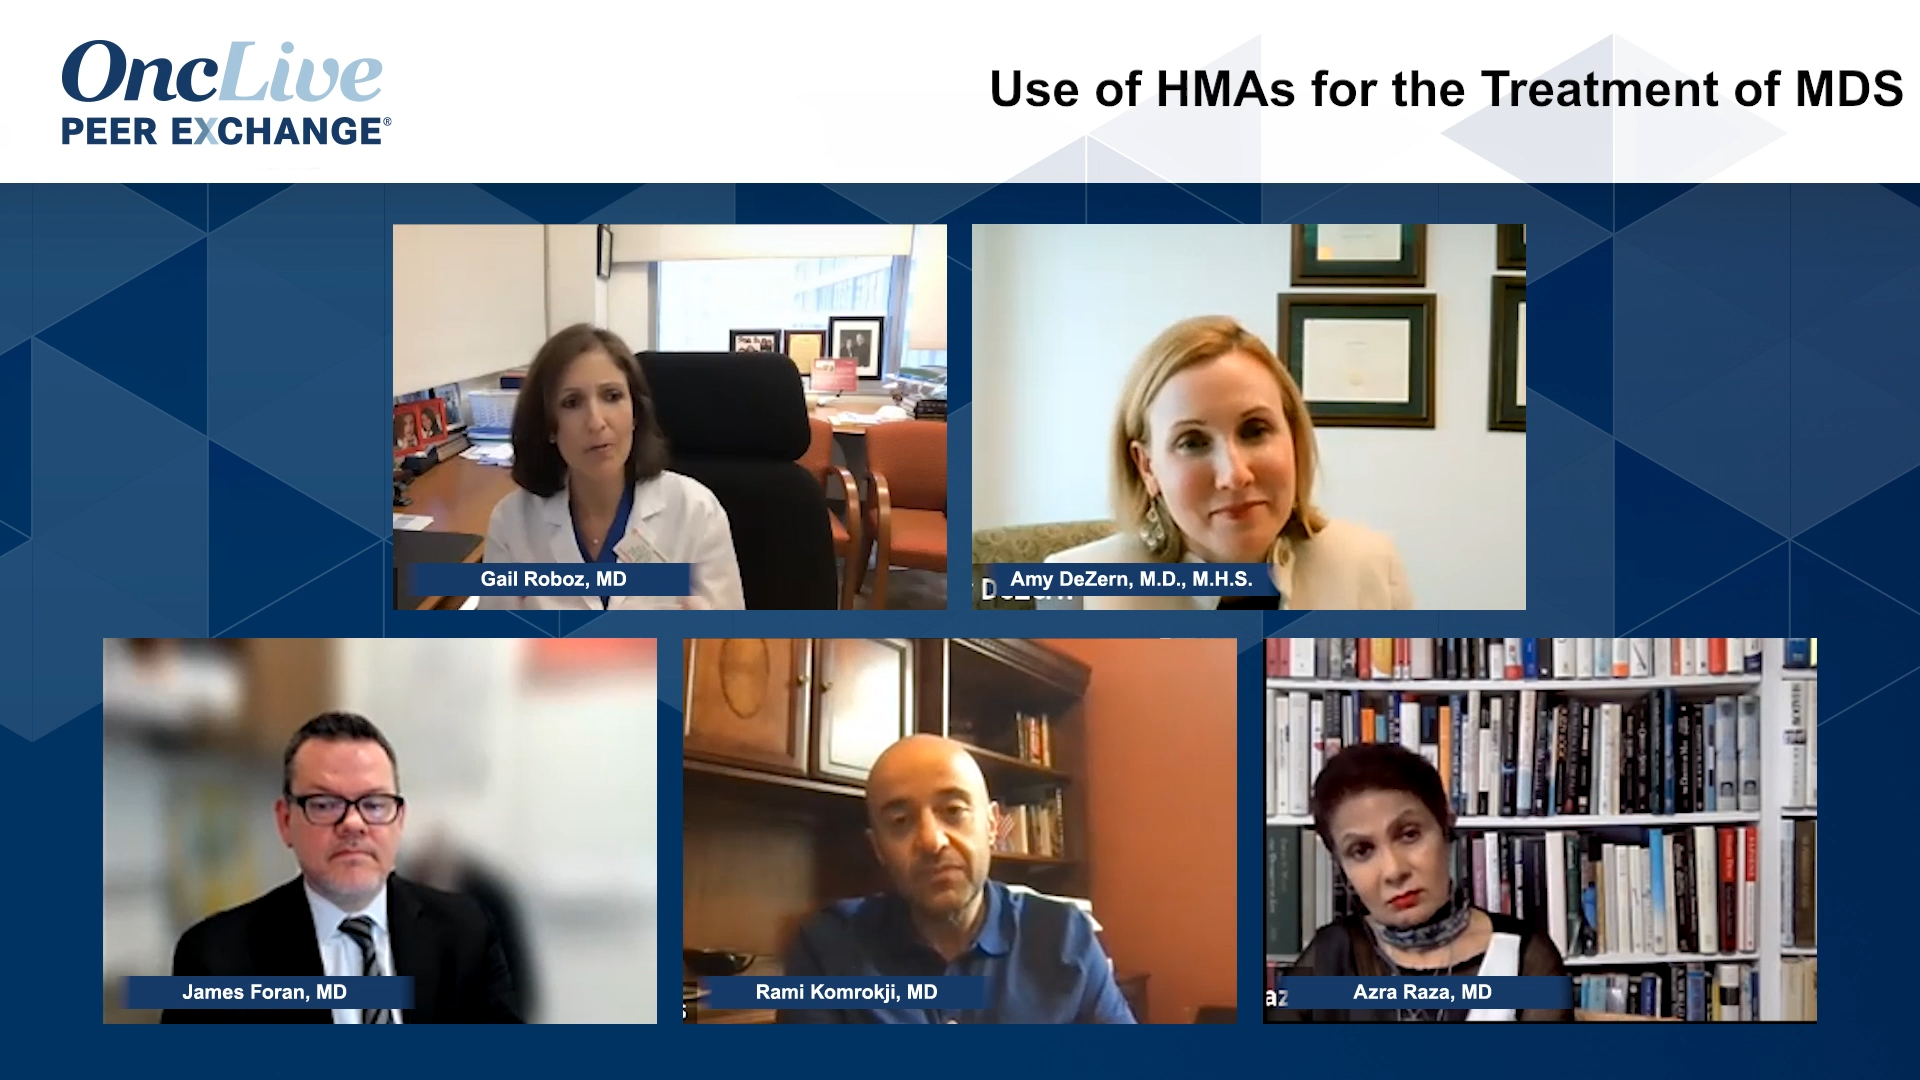 Use of HMAs for the Treatment of MDS